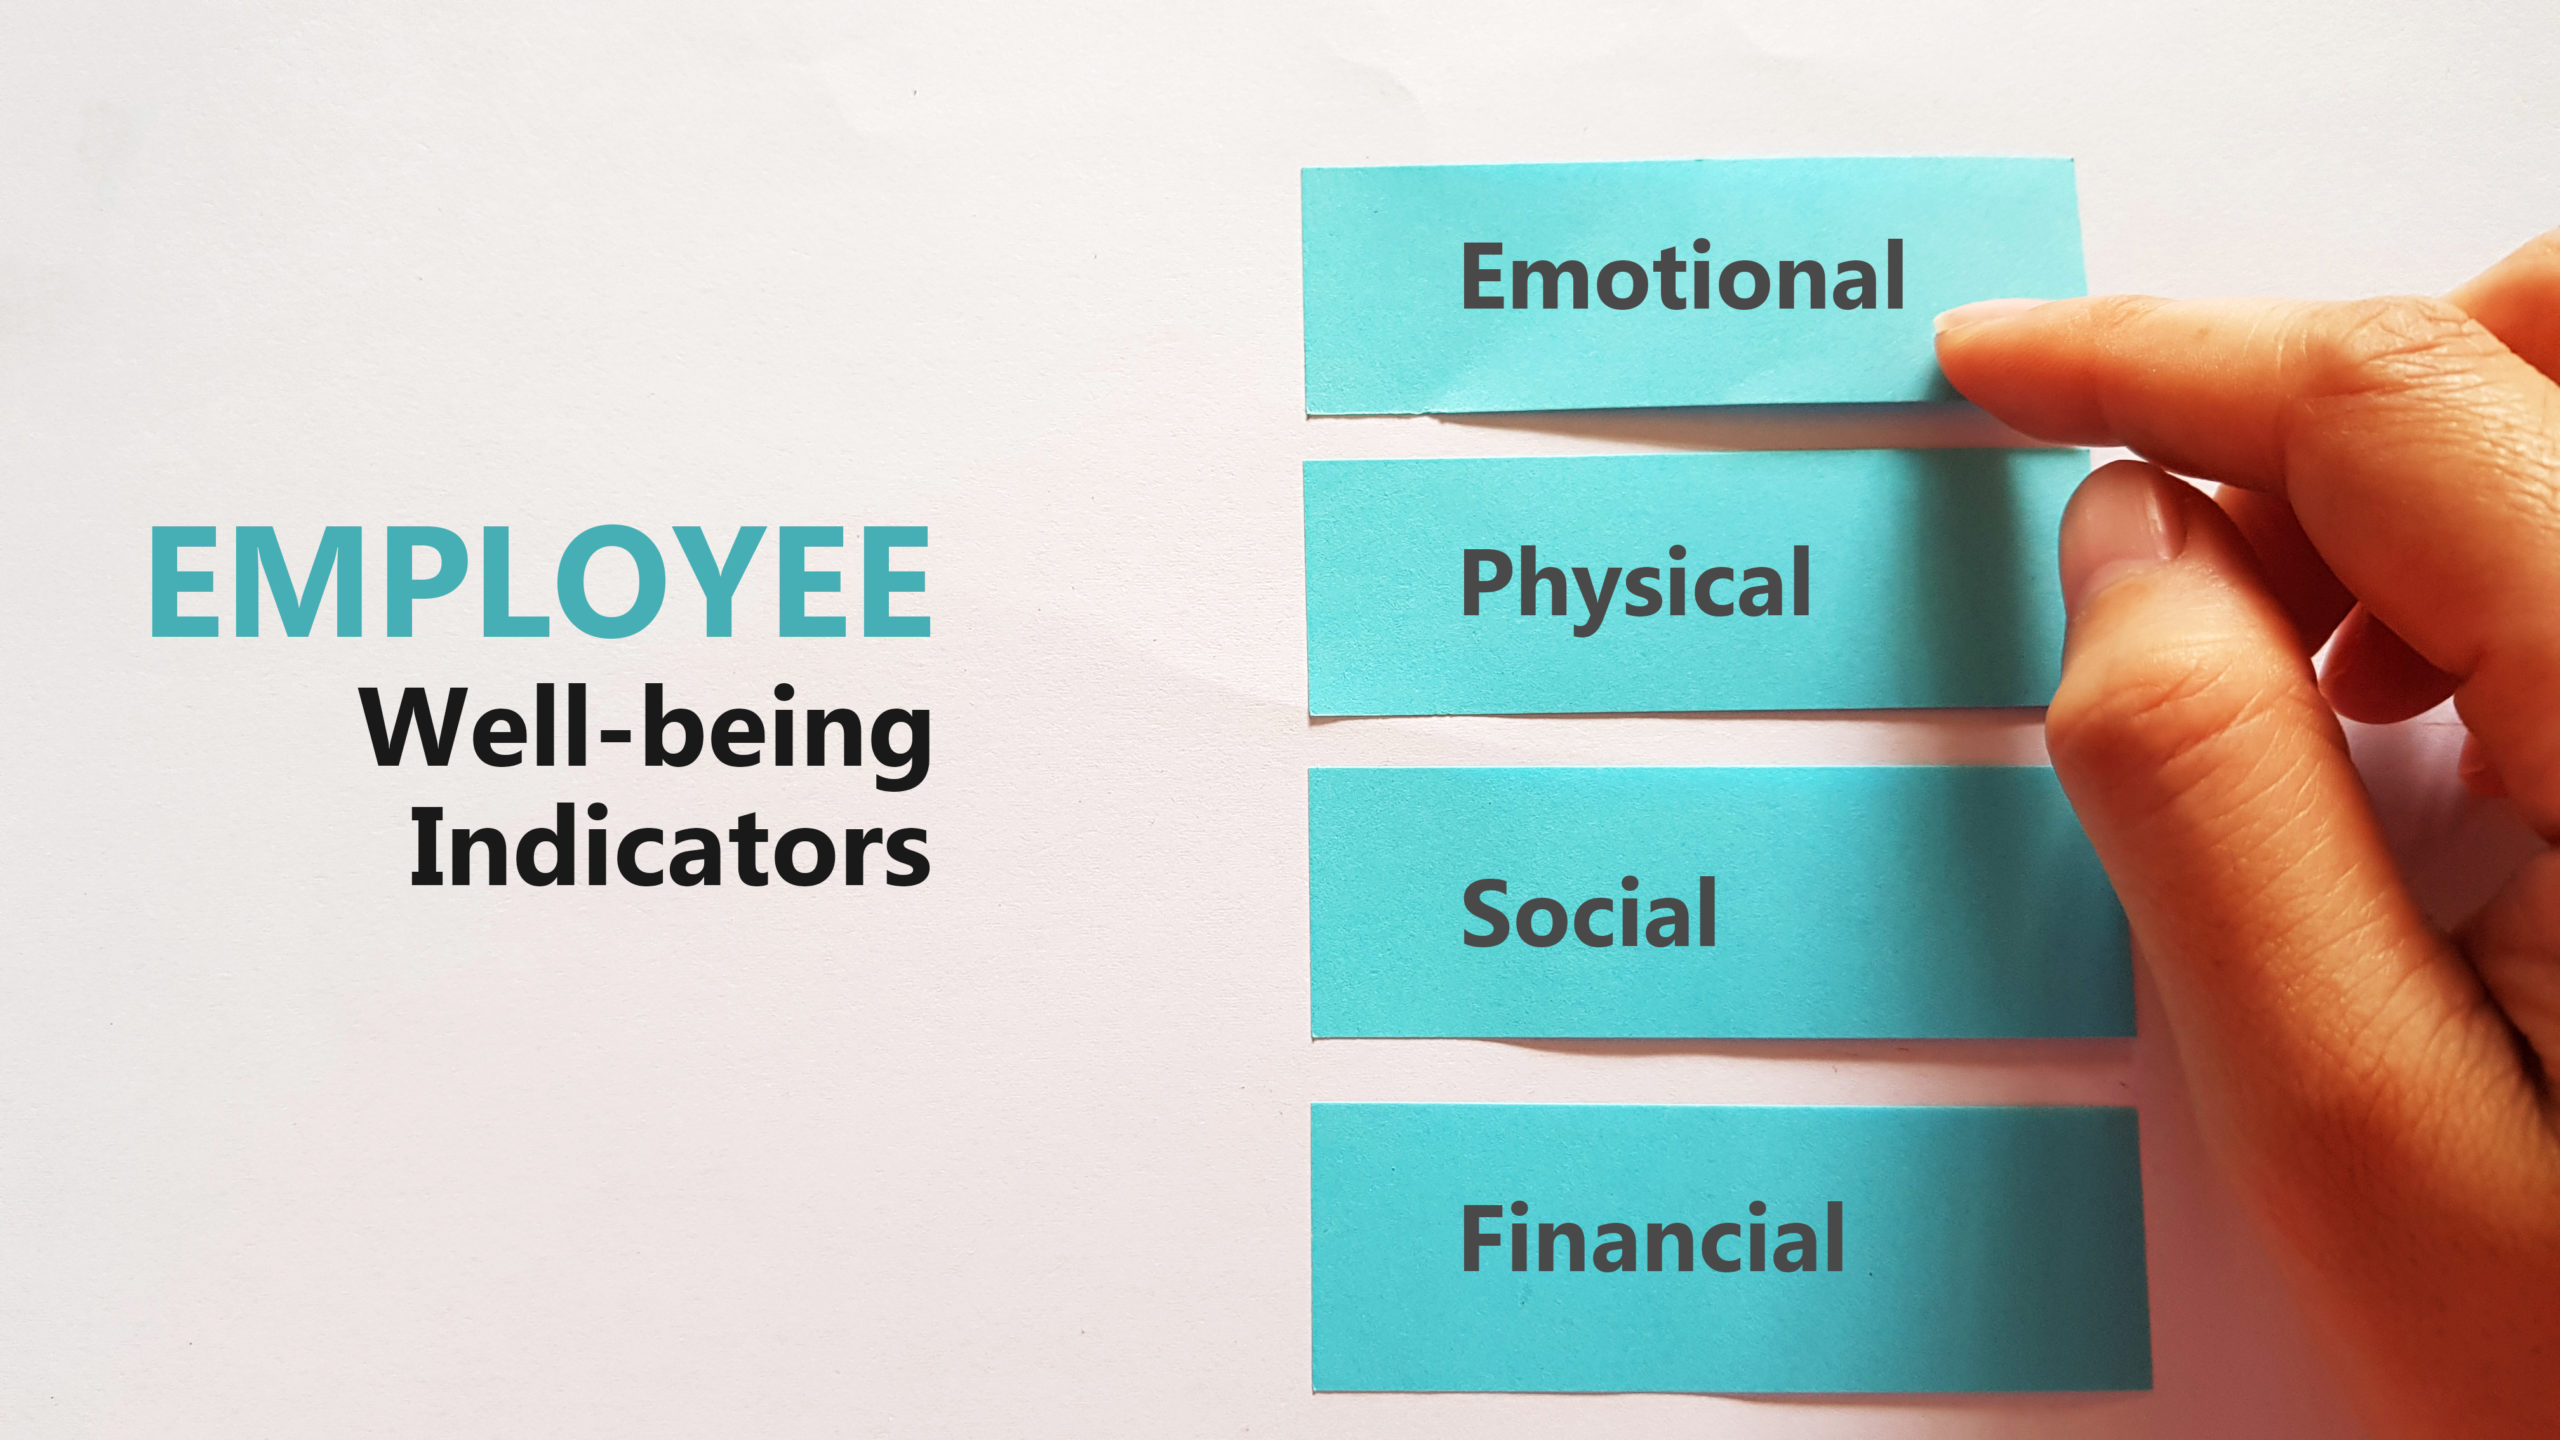 holistic approach to employee benefits